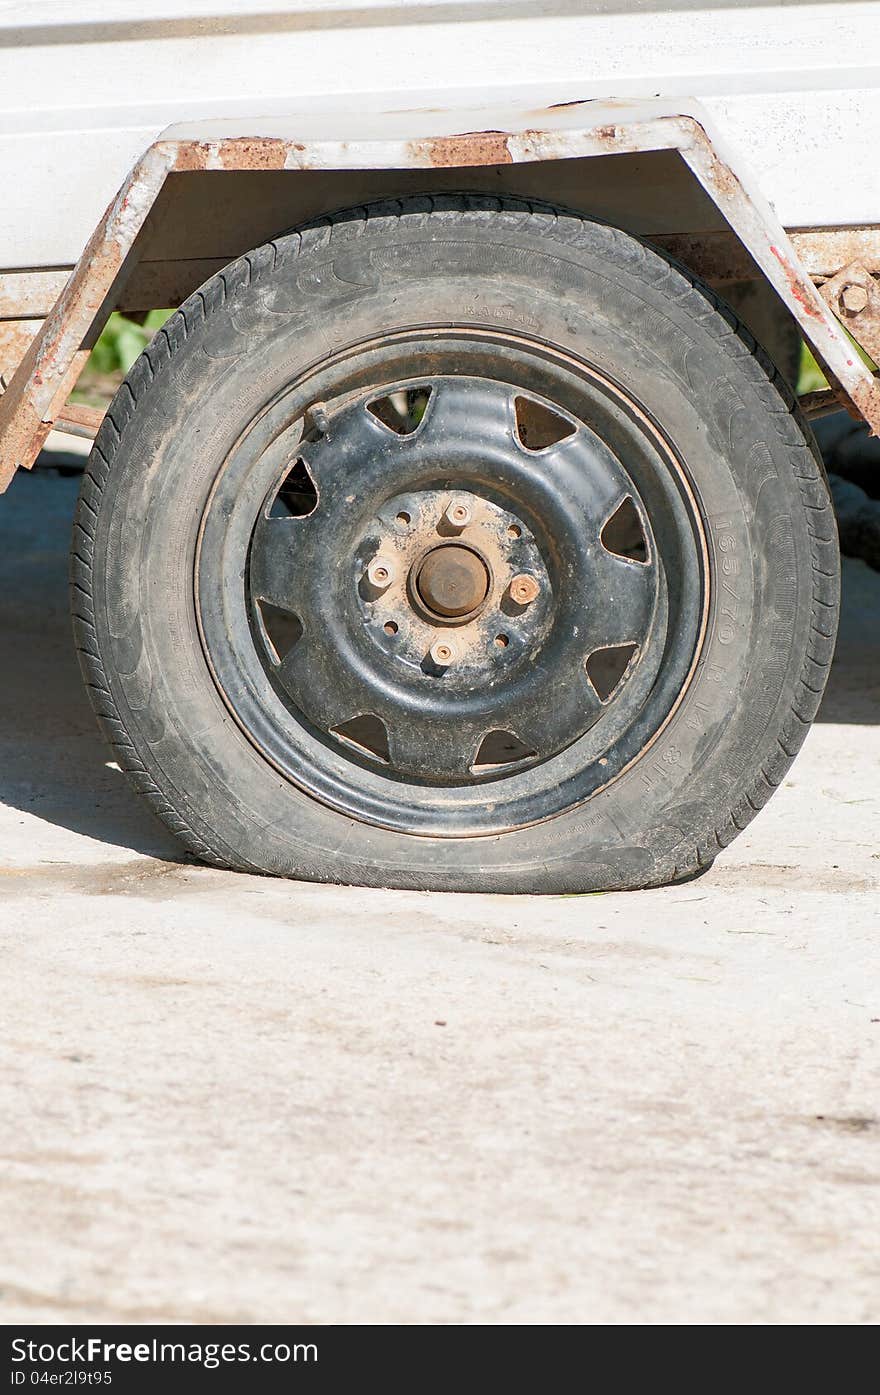 An old wheel with a flat tyre